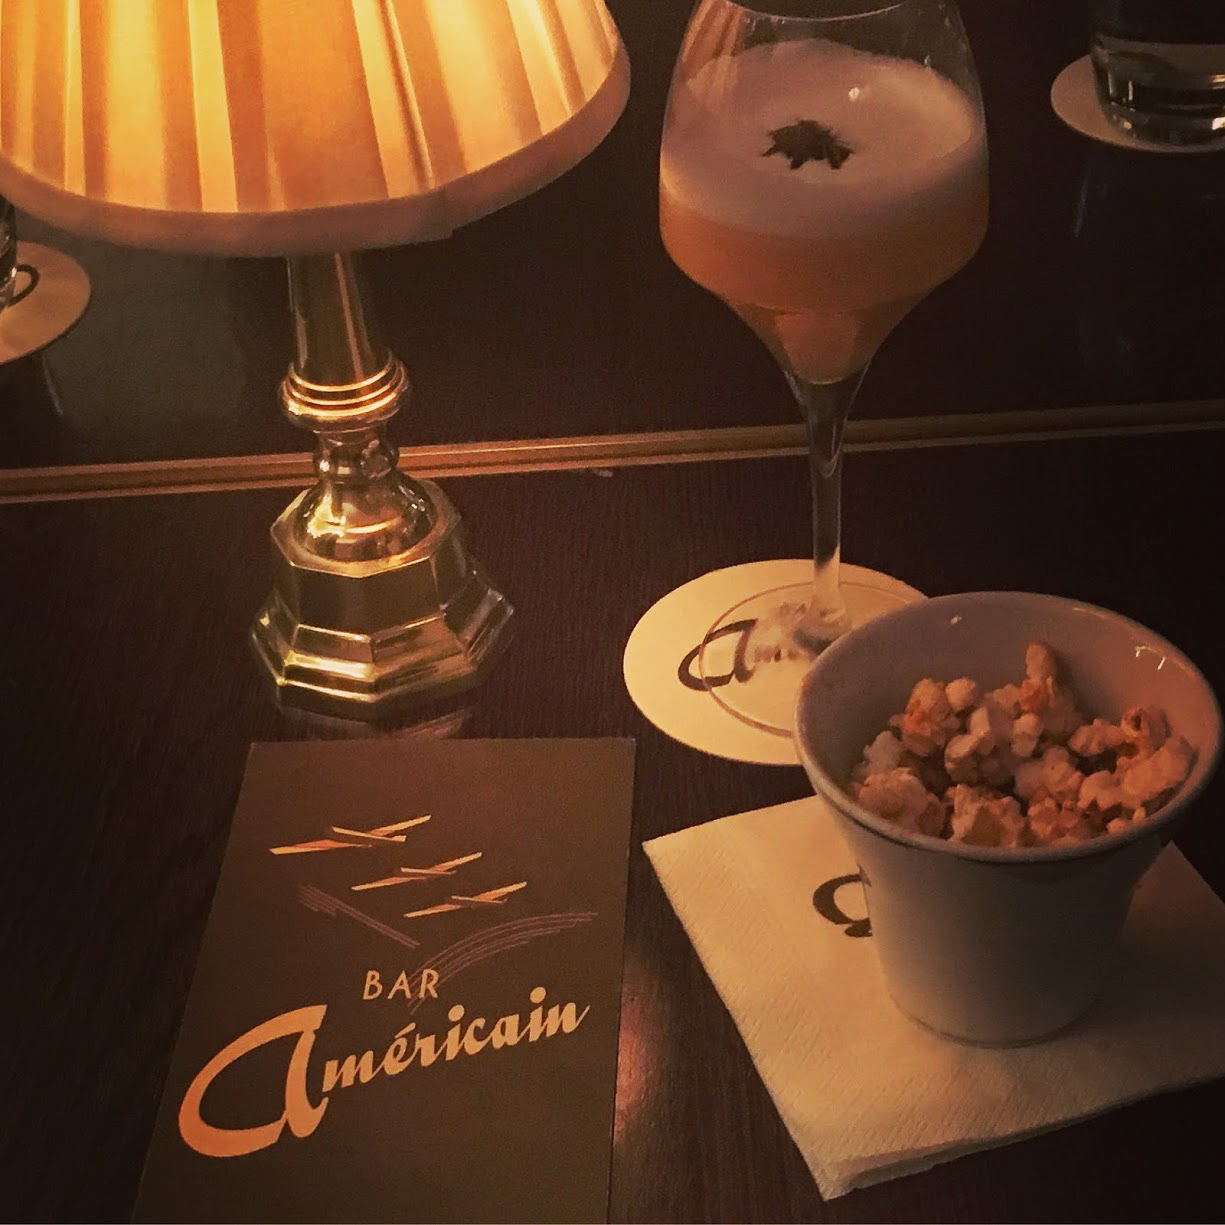 A silver table lamp, a wine glass with a foamy cocktail, a bowl of popcorn and a black menu card with Bar Americain in gold writing in Soho, London